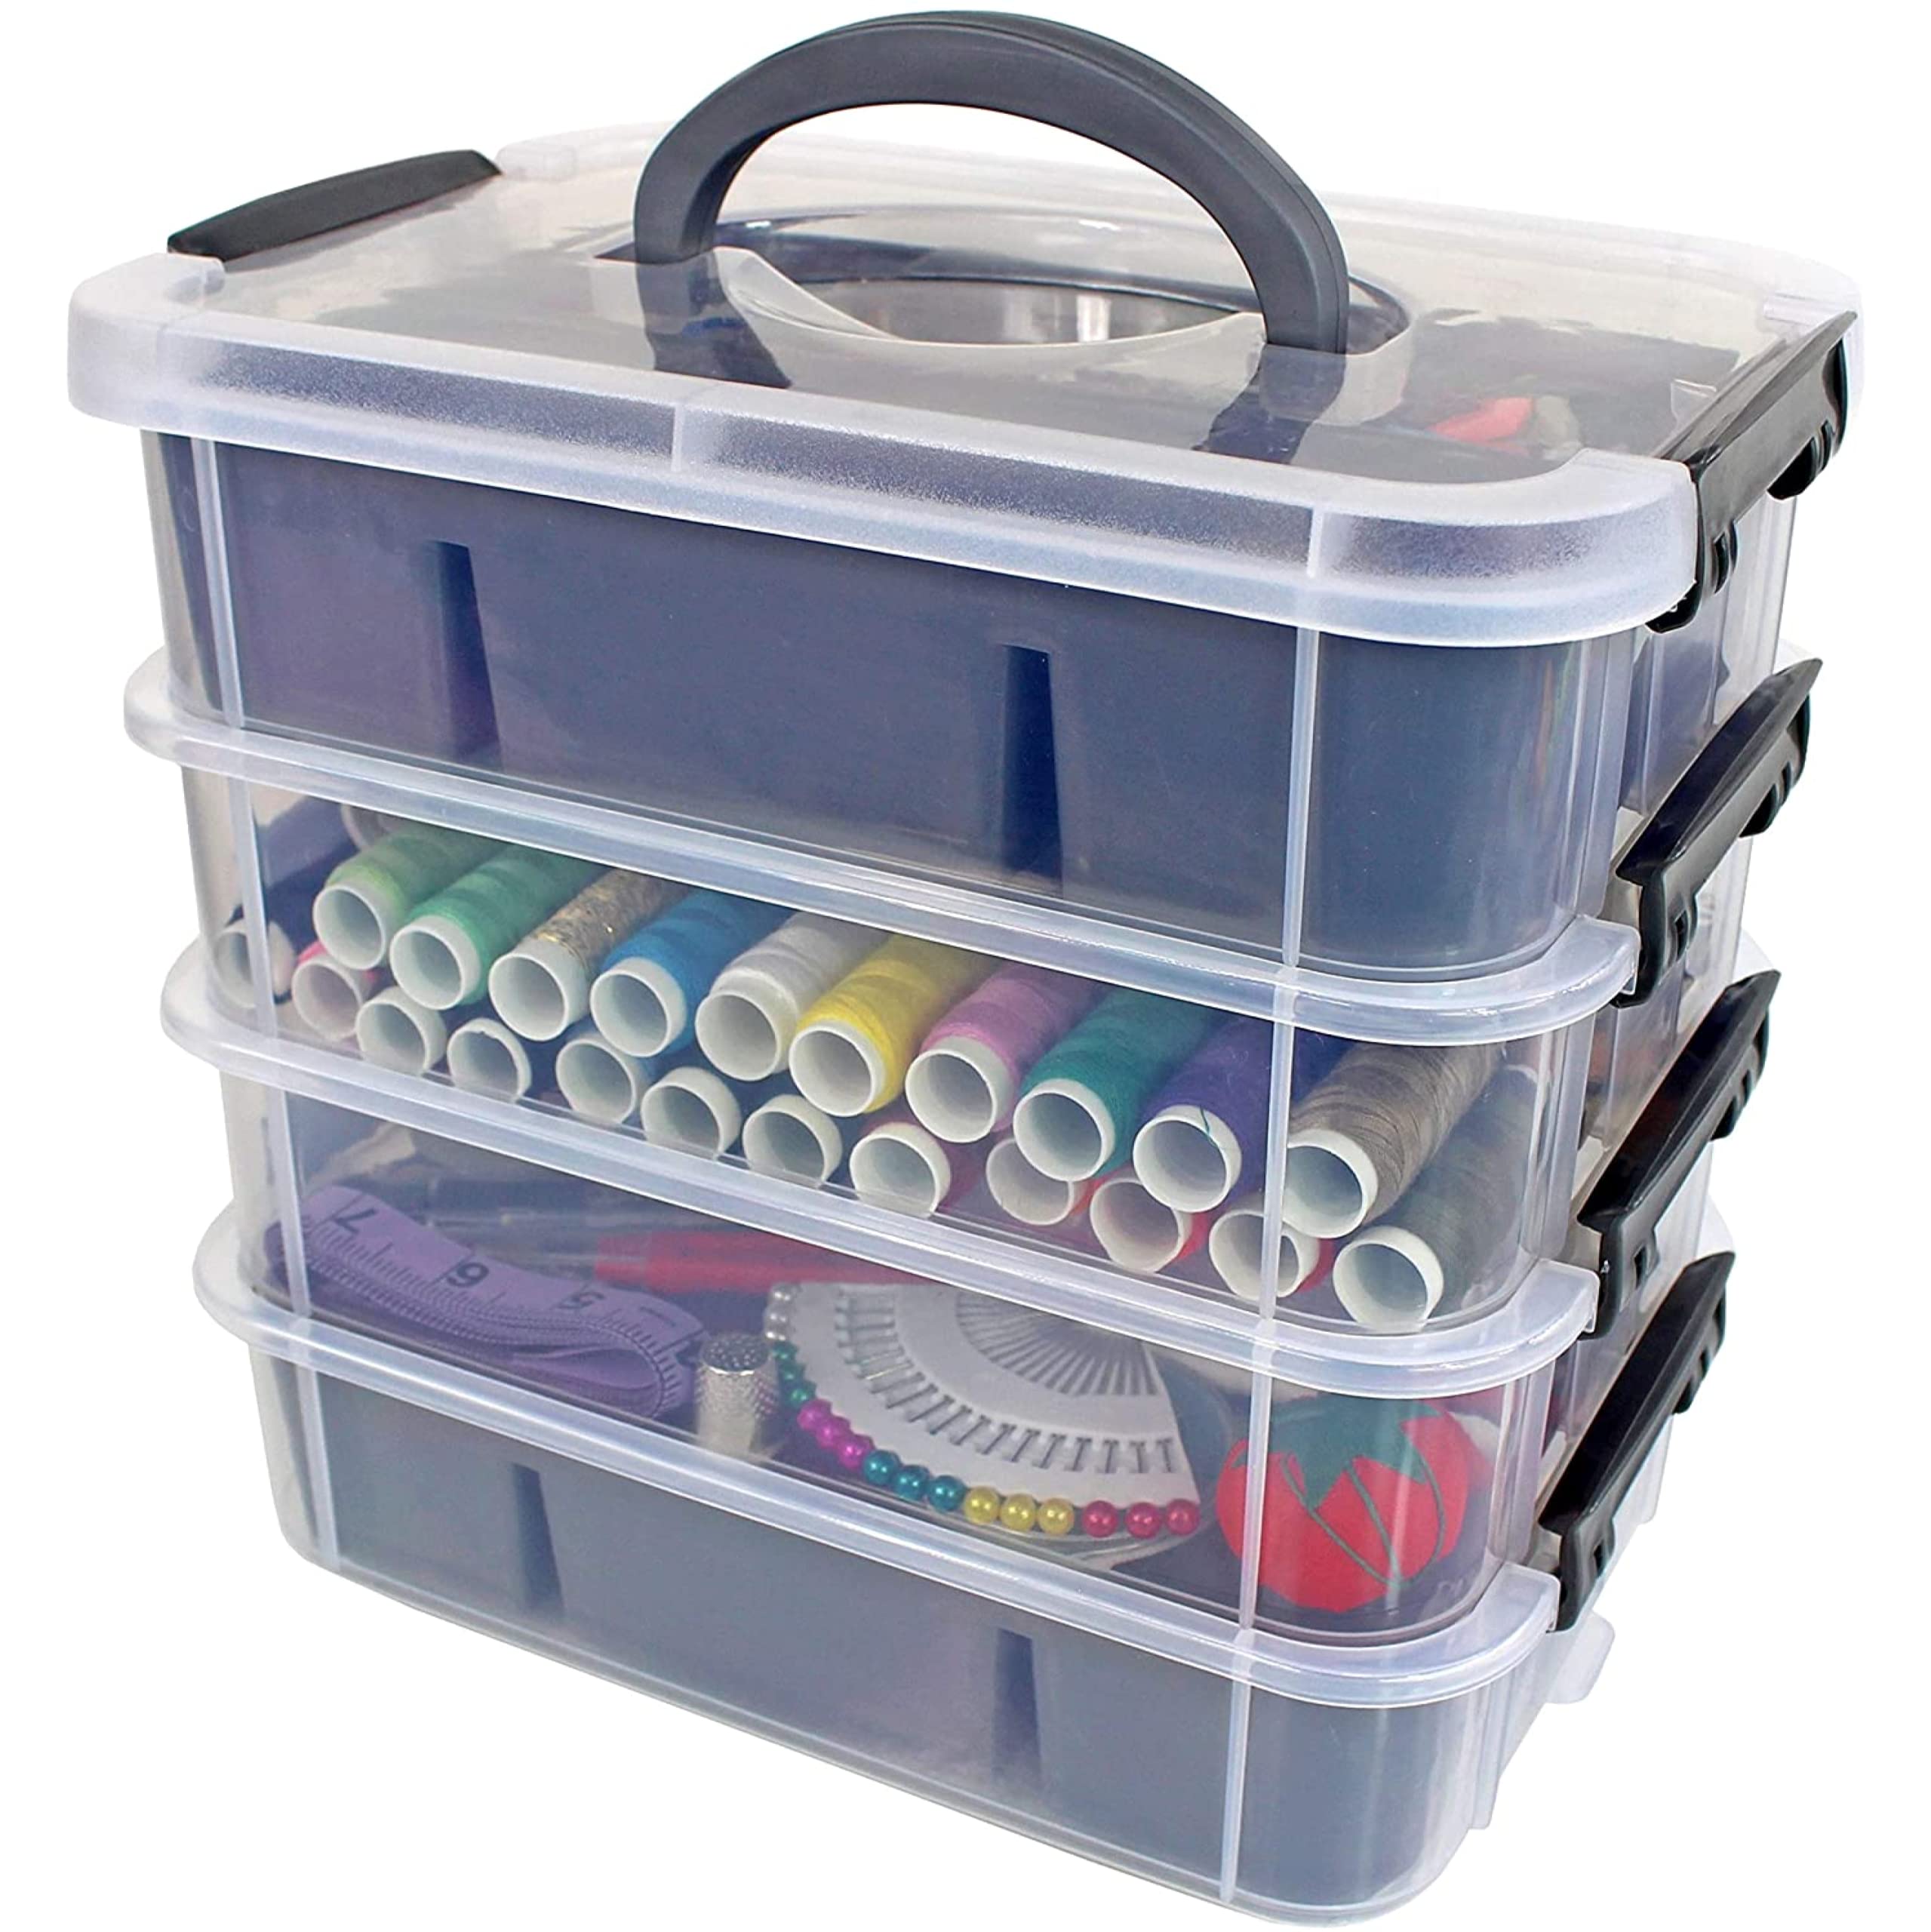 Bins & Things Stackable Storage Container with 2 Trays - Gray